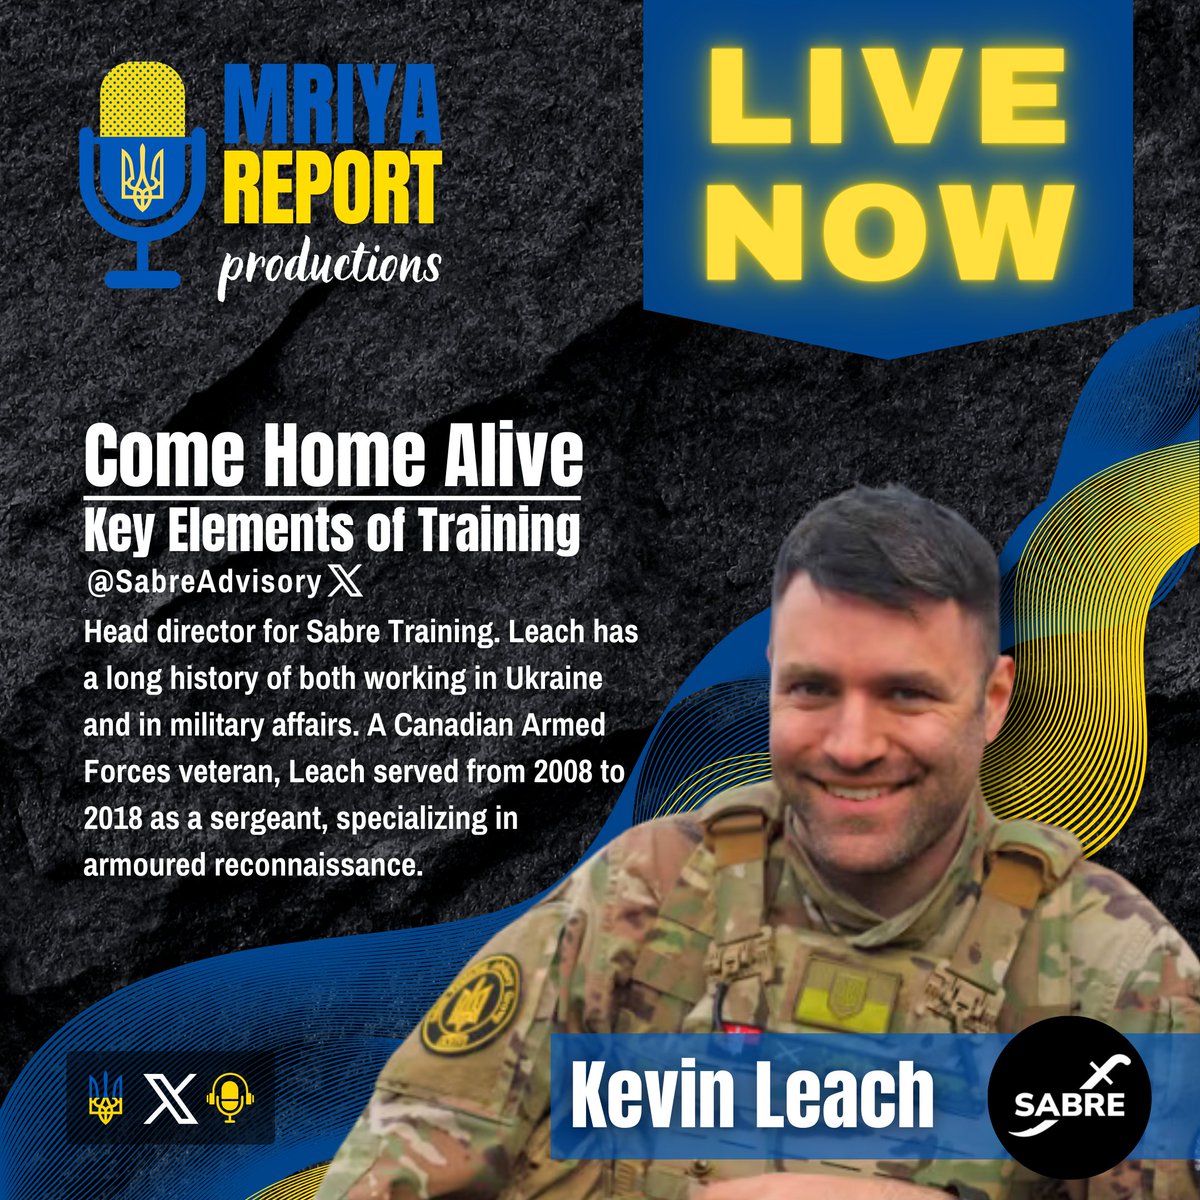 🇺🇦 LIVE NOW 🇺🇦 for our new weekly segment 💥 Come Home Alive - Key Elements of Training 💥 with our very special guest Kevin Leach @SabreAdvisory! Kevin Leach is the Head director and founder of Sabre Training Advisory Group, a professional military training non-profit. Their…